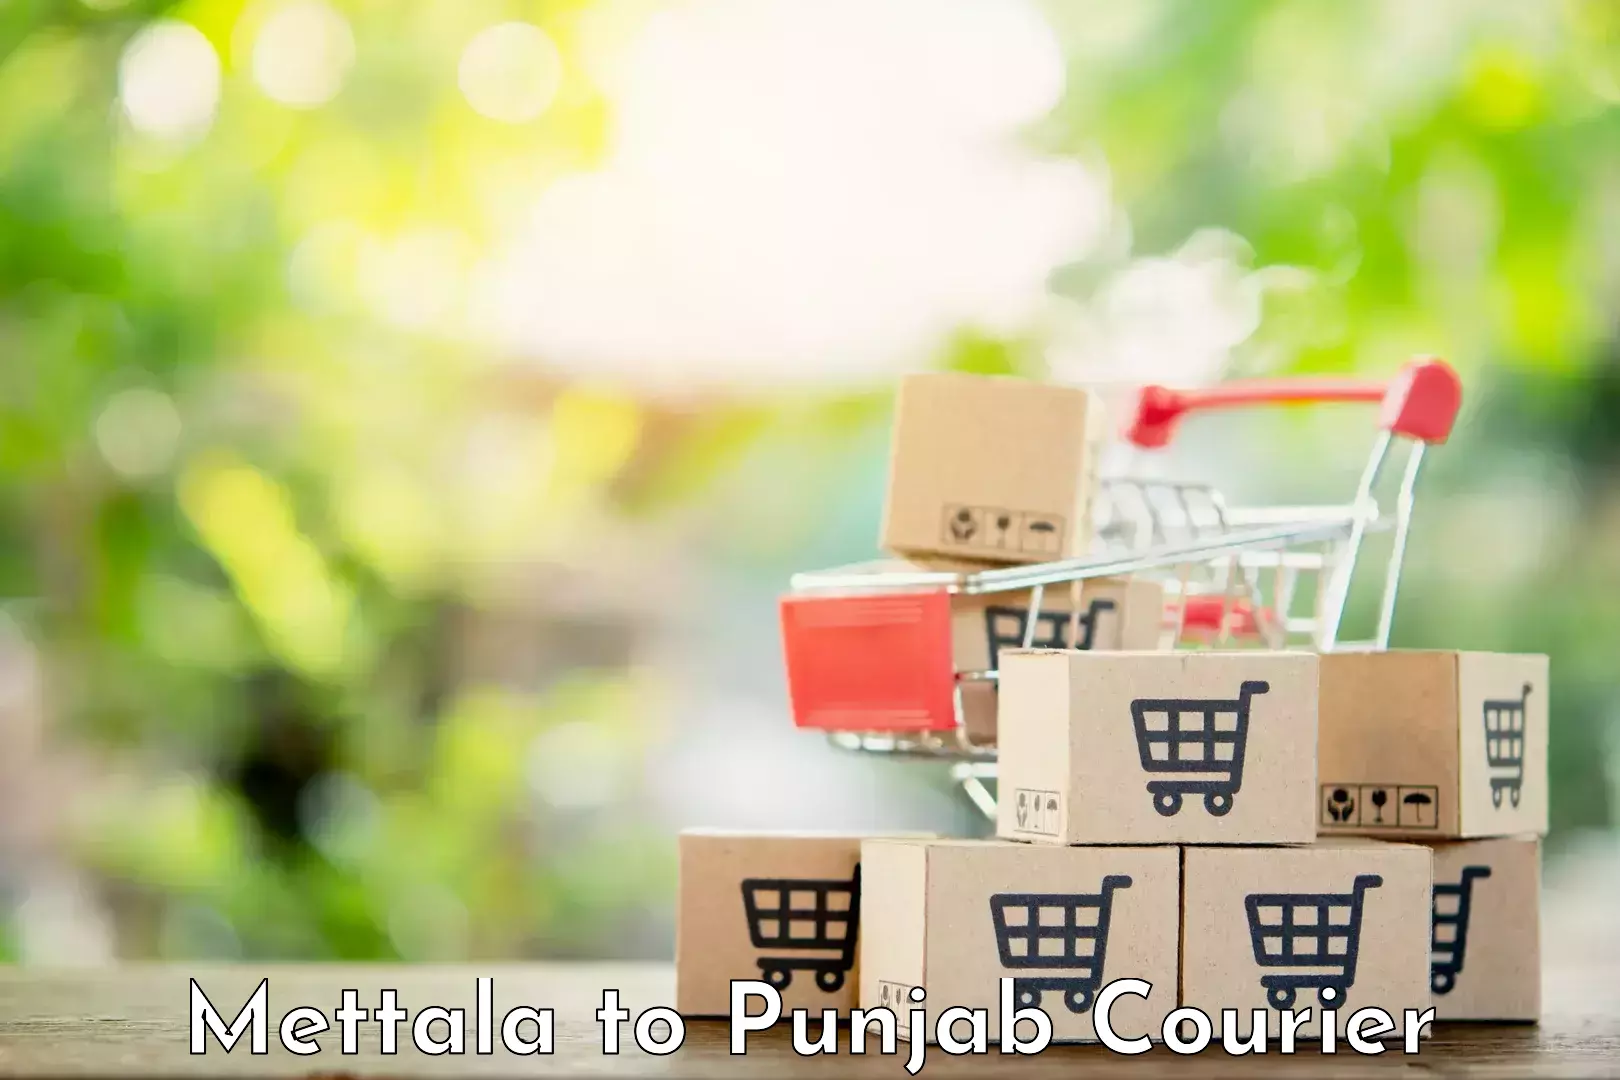 Efficient courier operations Mettala to Punjab